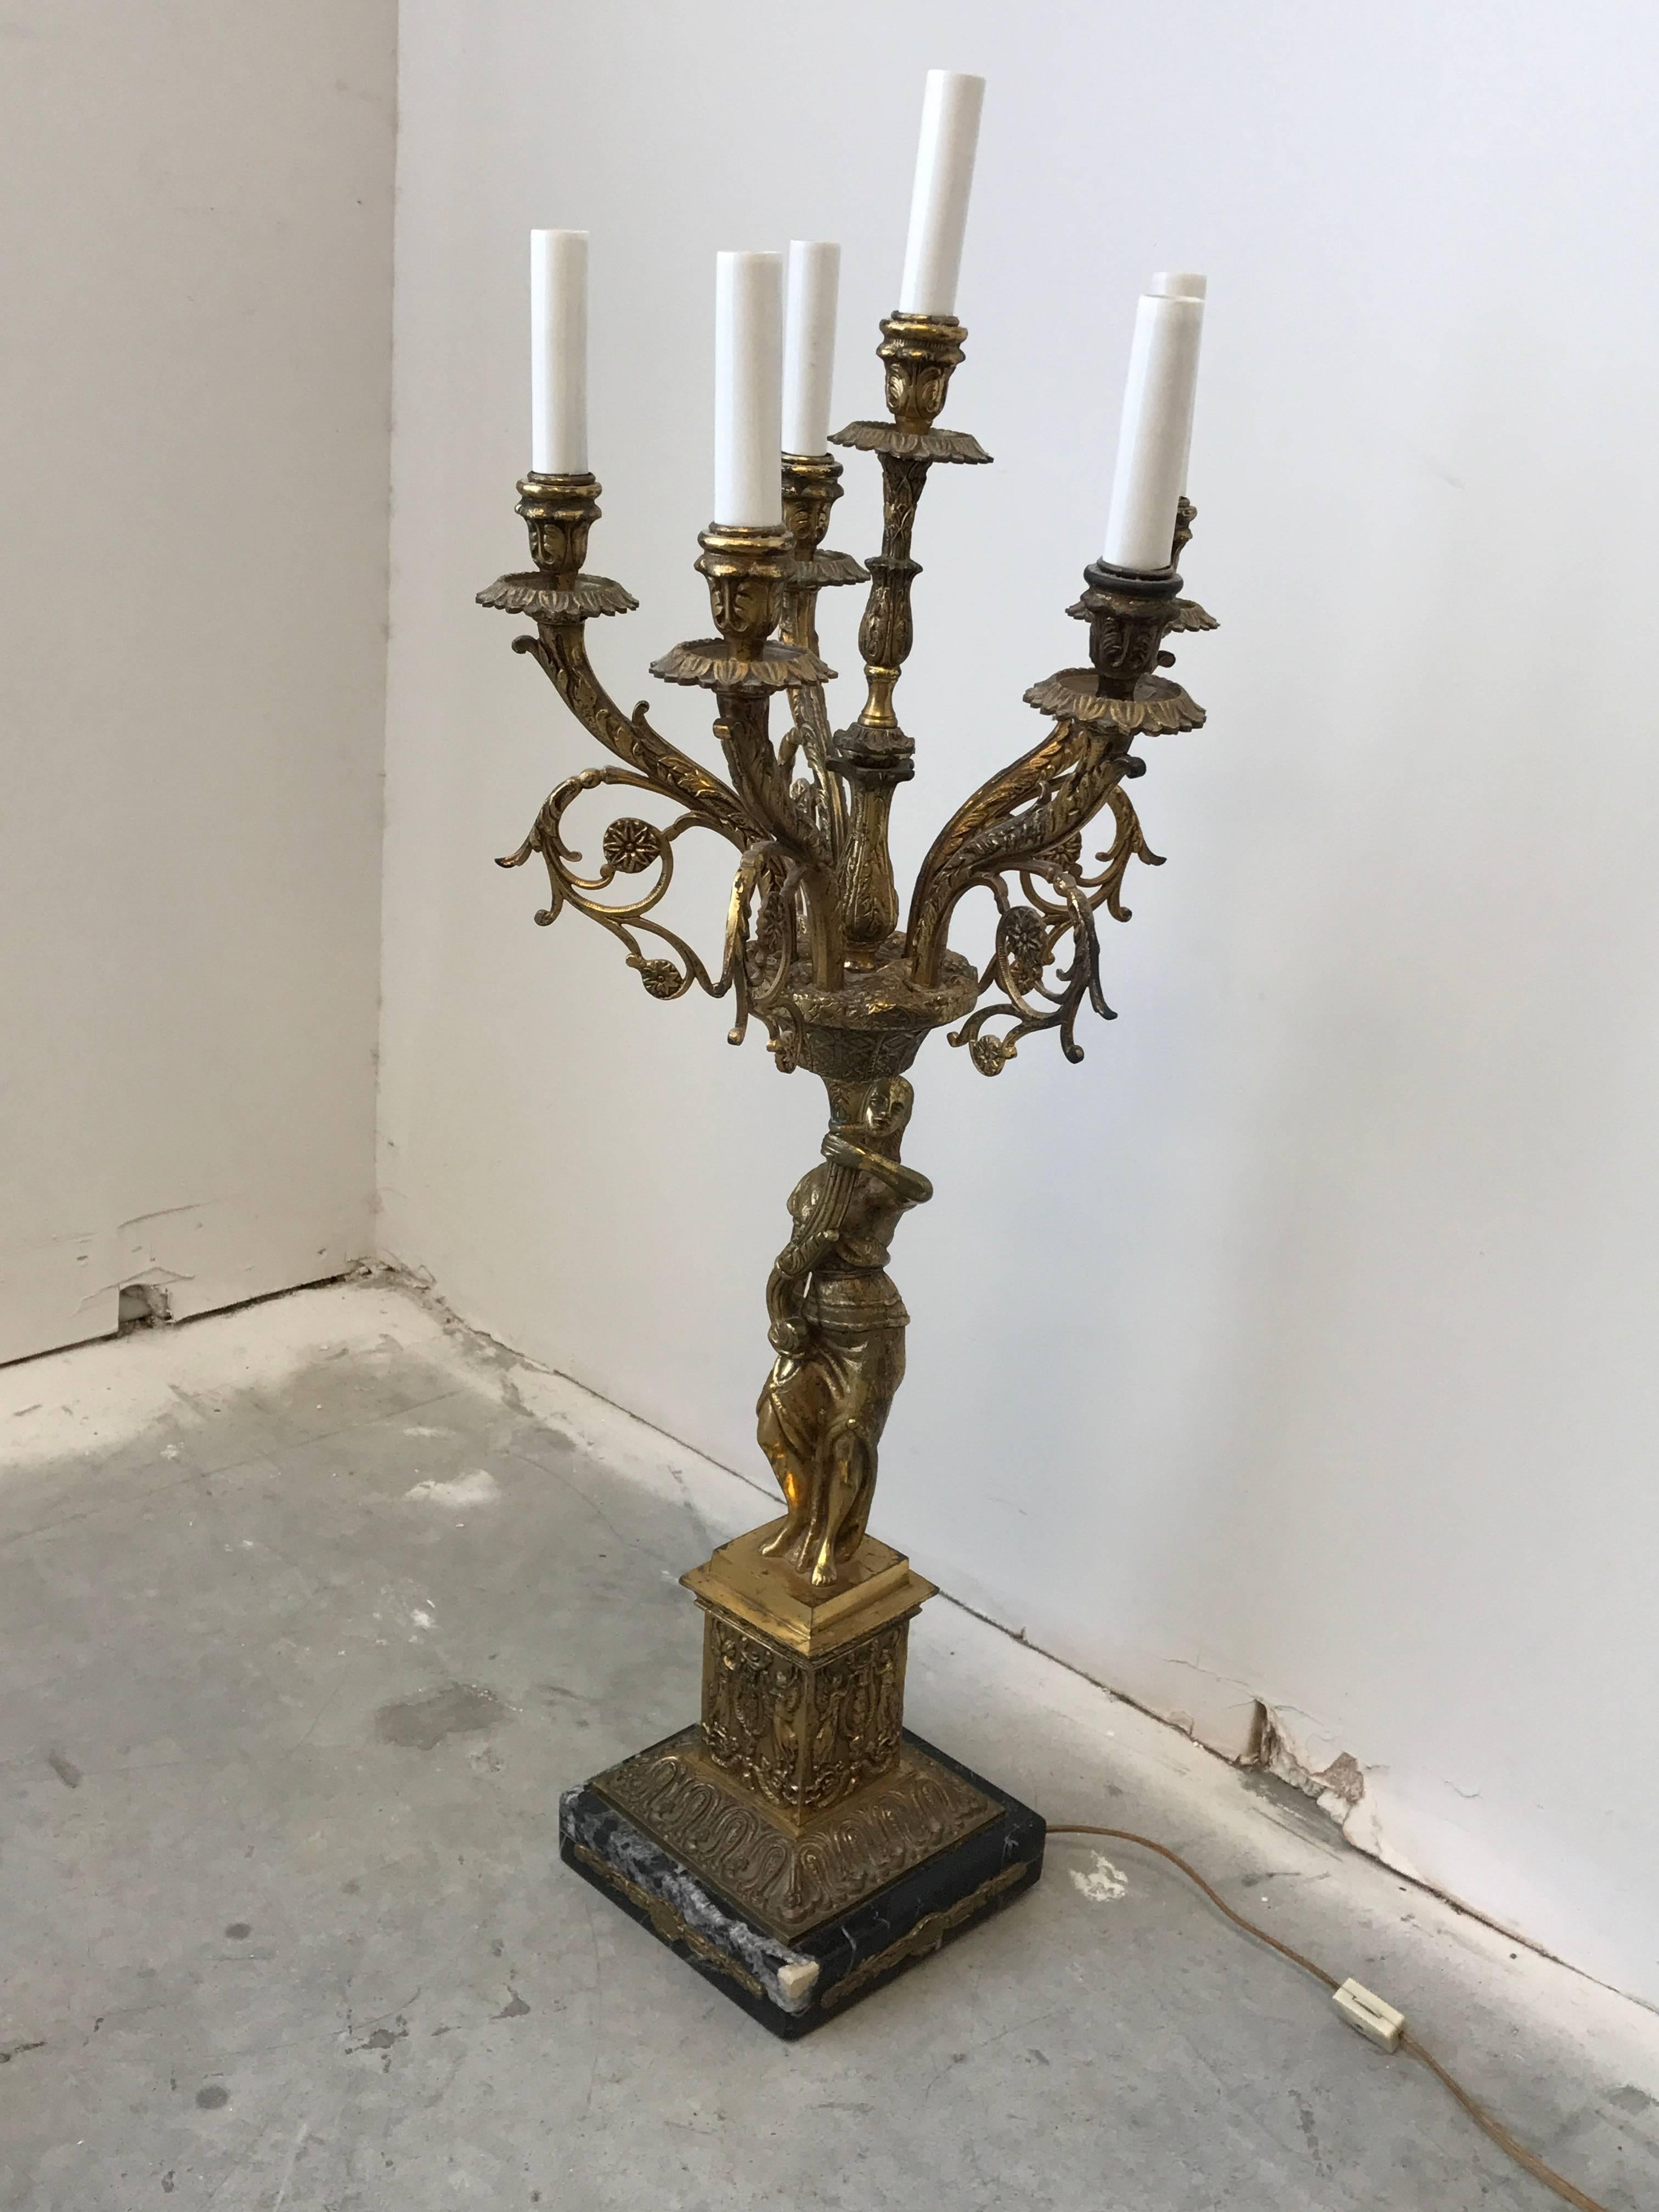 Offered is an exquisite, late 19th century French Art Nouveau, bronze and marble sculptural candelabra lamp. The piece has six arms, all with heavy detailing. Extremely heavy.